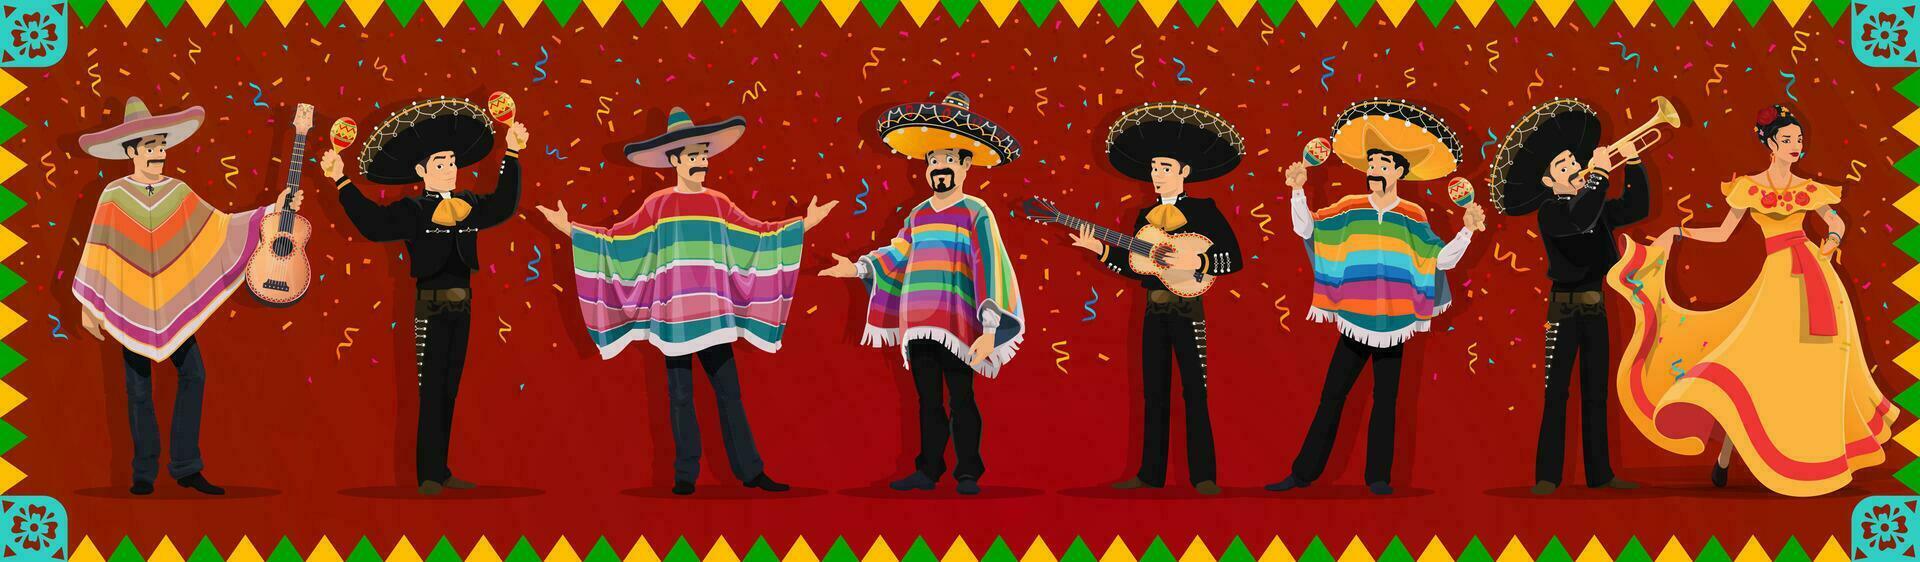 Cartoon Mexican characters on holiday carnival vector